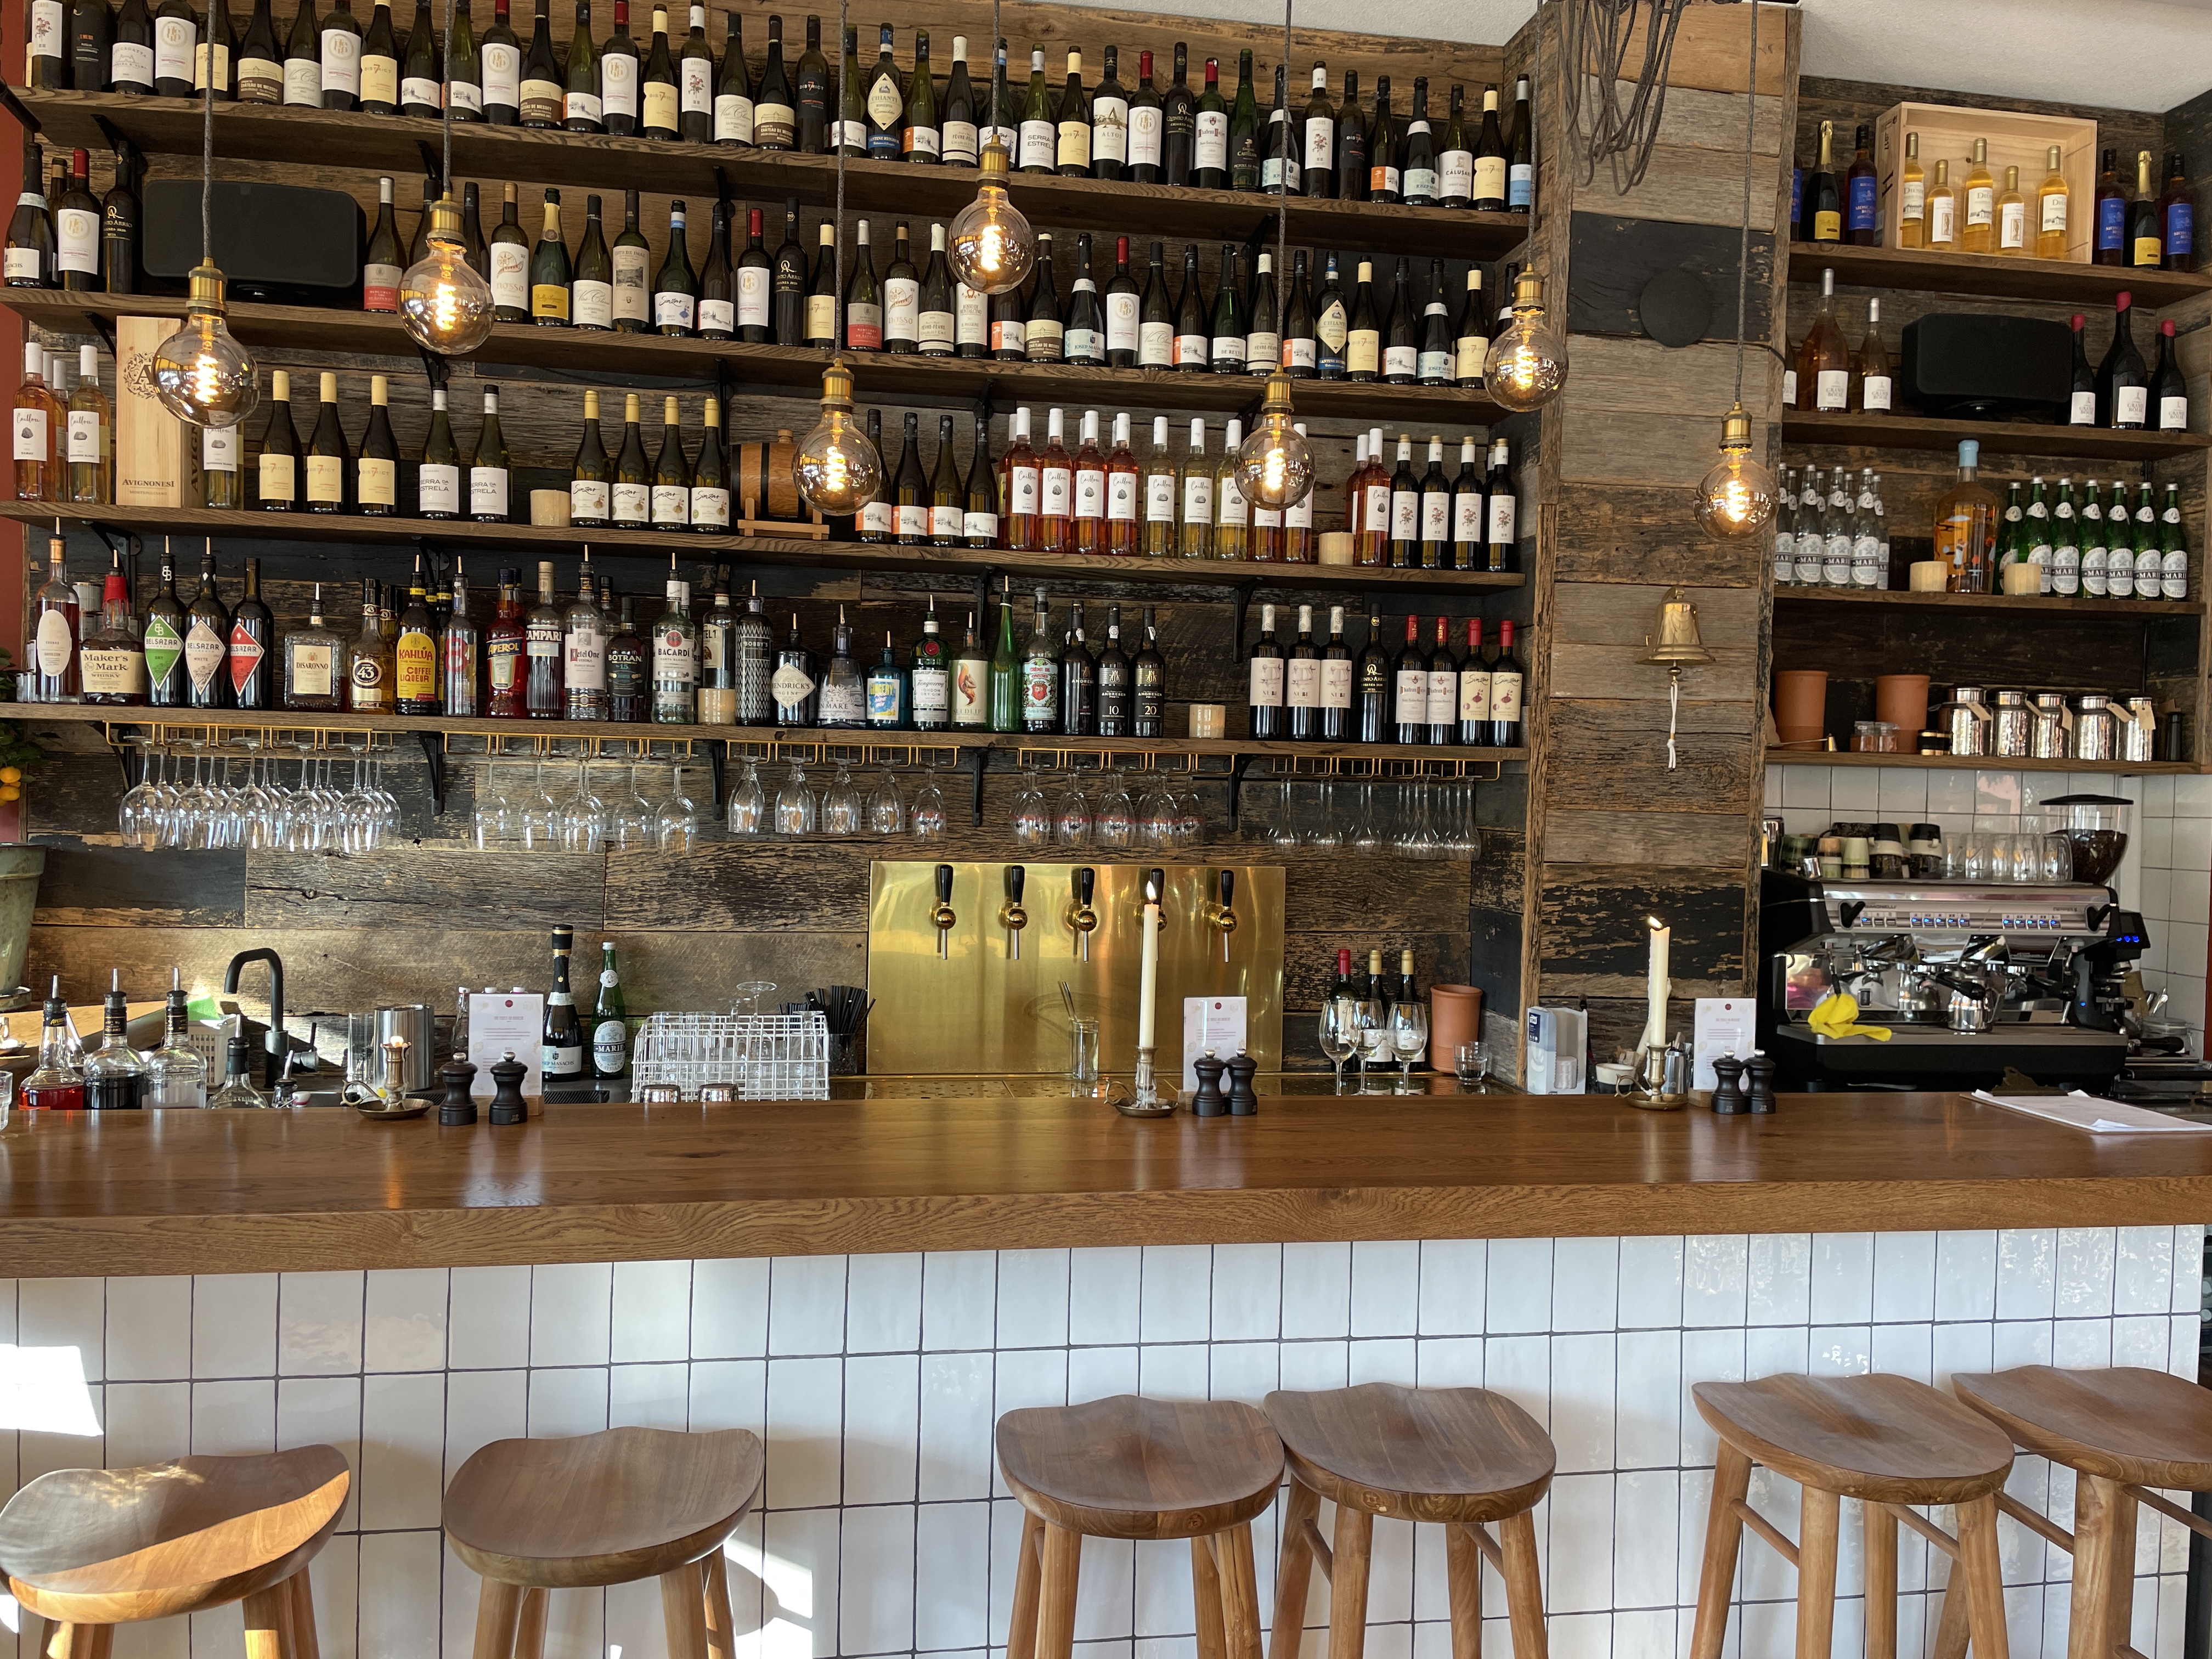 Barlotta: a gem in East Amsterdam with scrumptious antipasti and wines